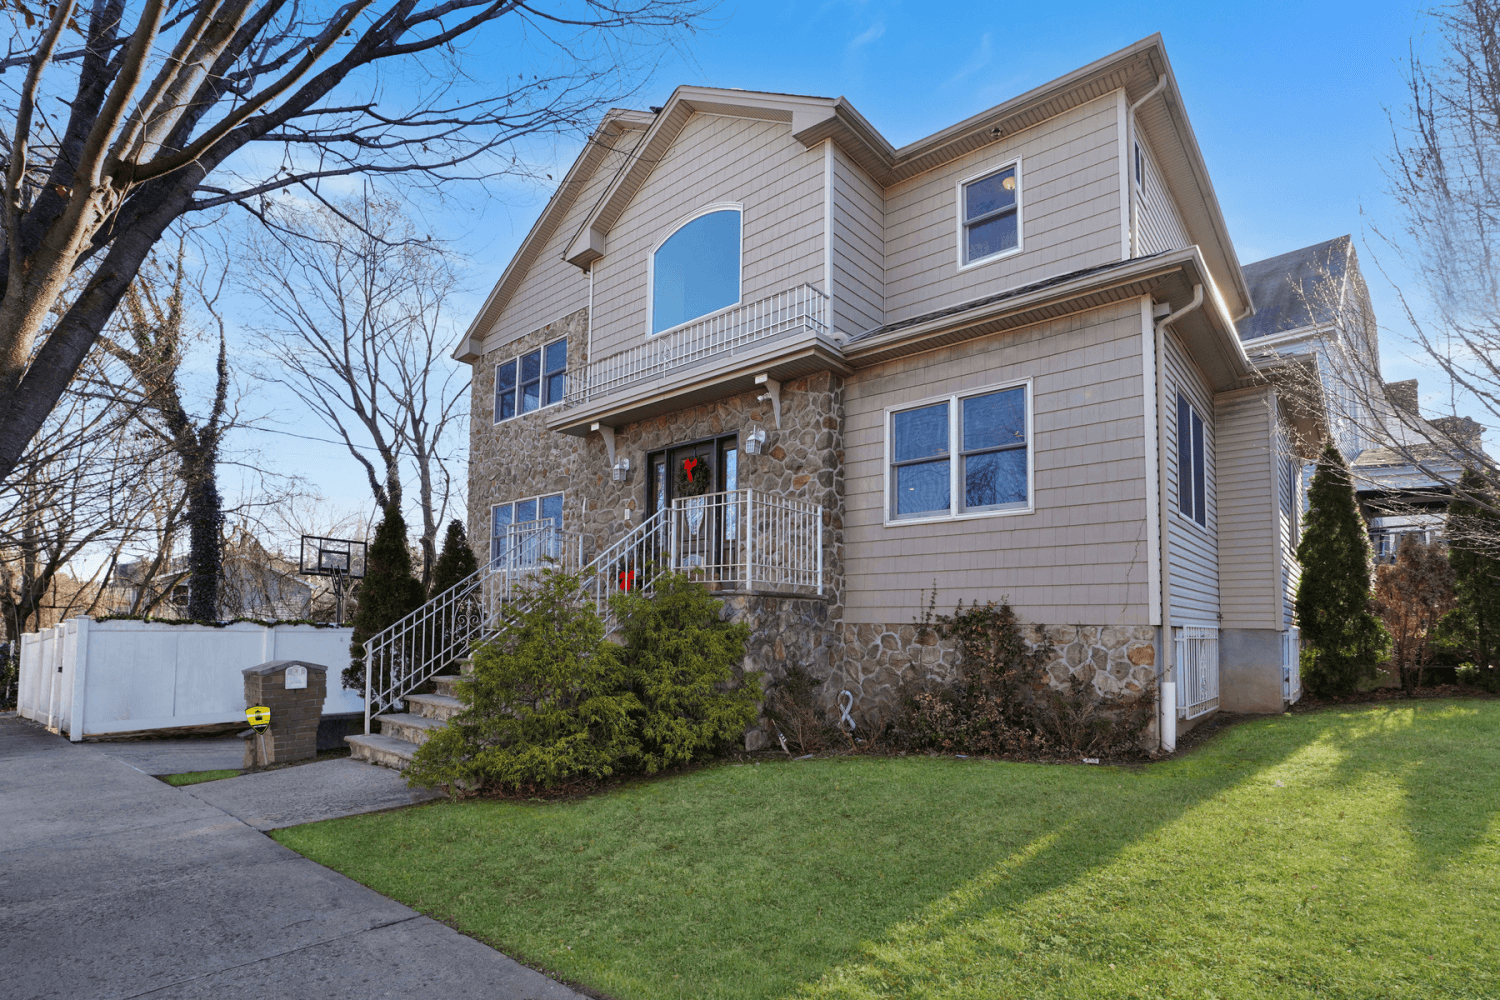 Move Right Into this beautiful 2 detached home convenient location near the Verrazano bridge and close to shopping and transportation.